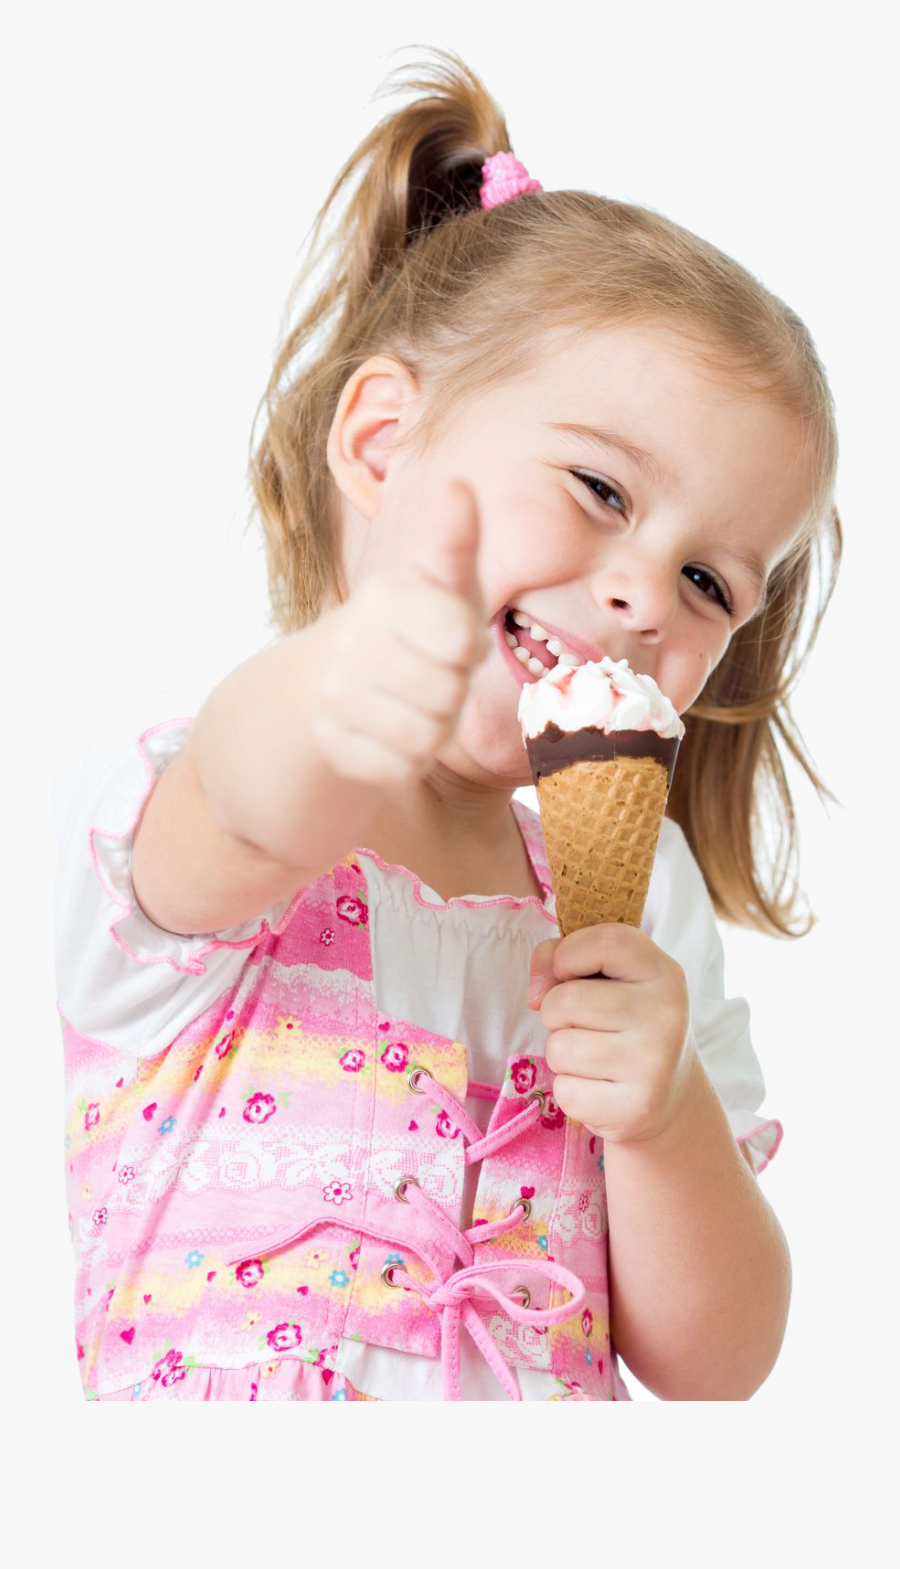 Clip Art Happiness Siowfa Science In - Kids Eating Ice Cream Png, Transparent Clipart